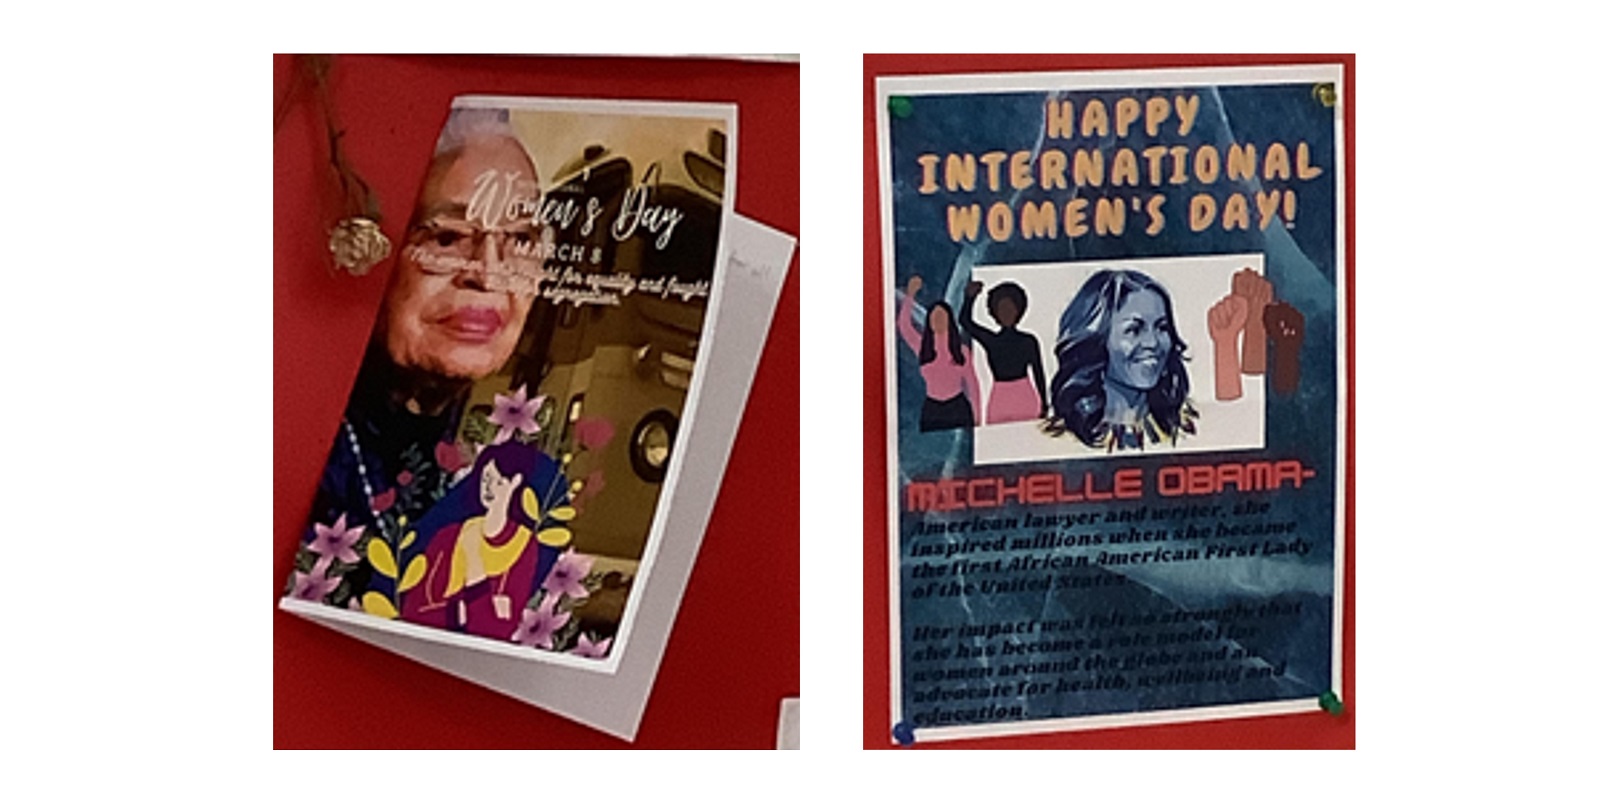 Women's day posters